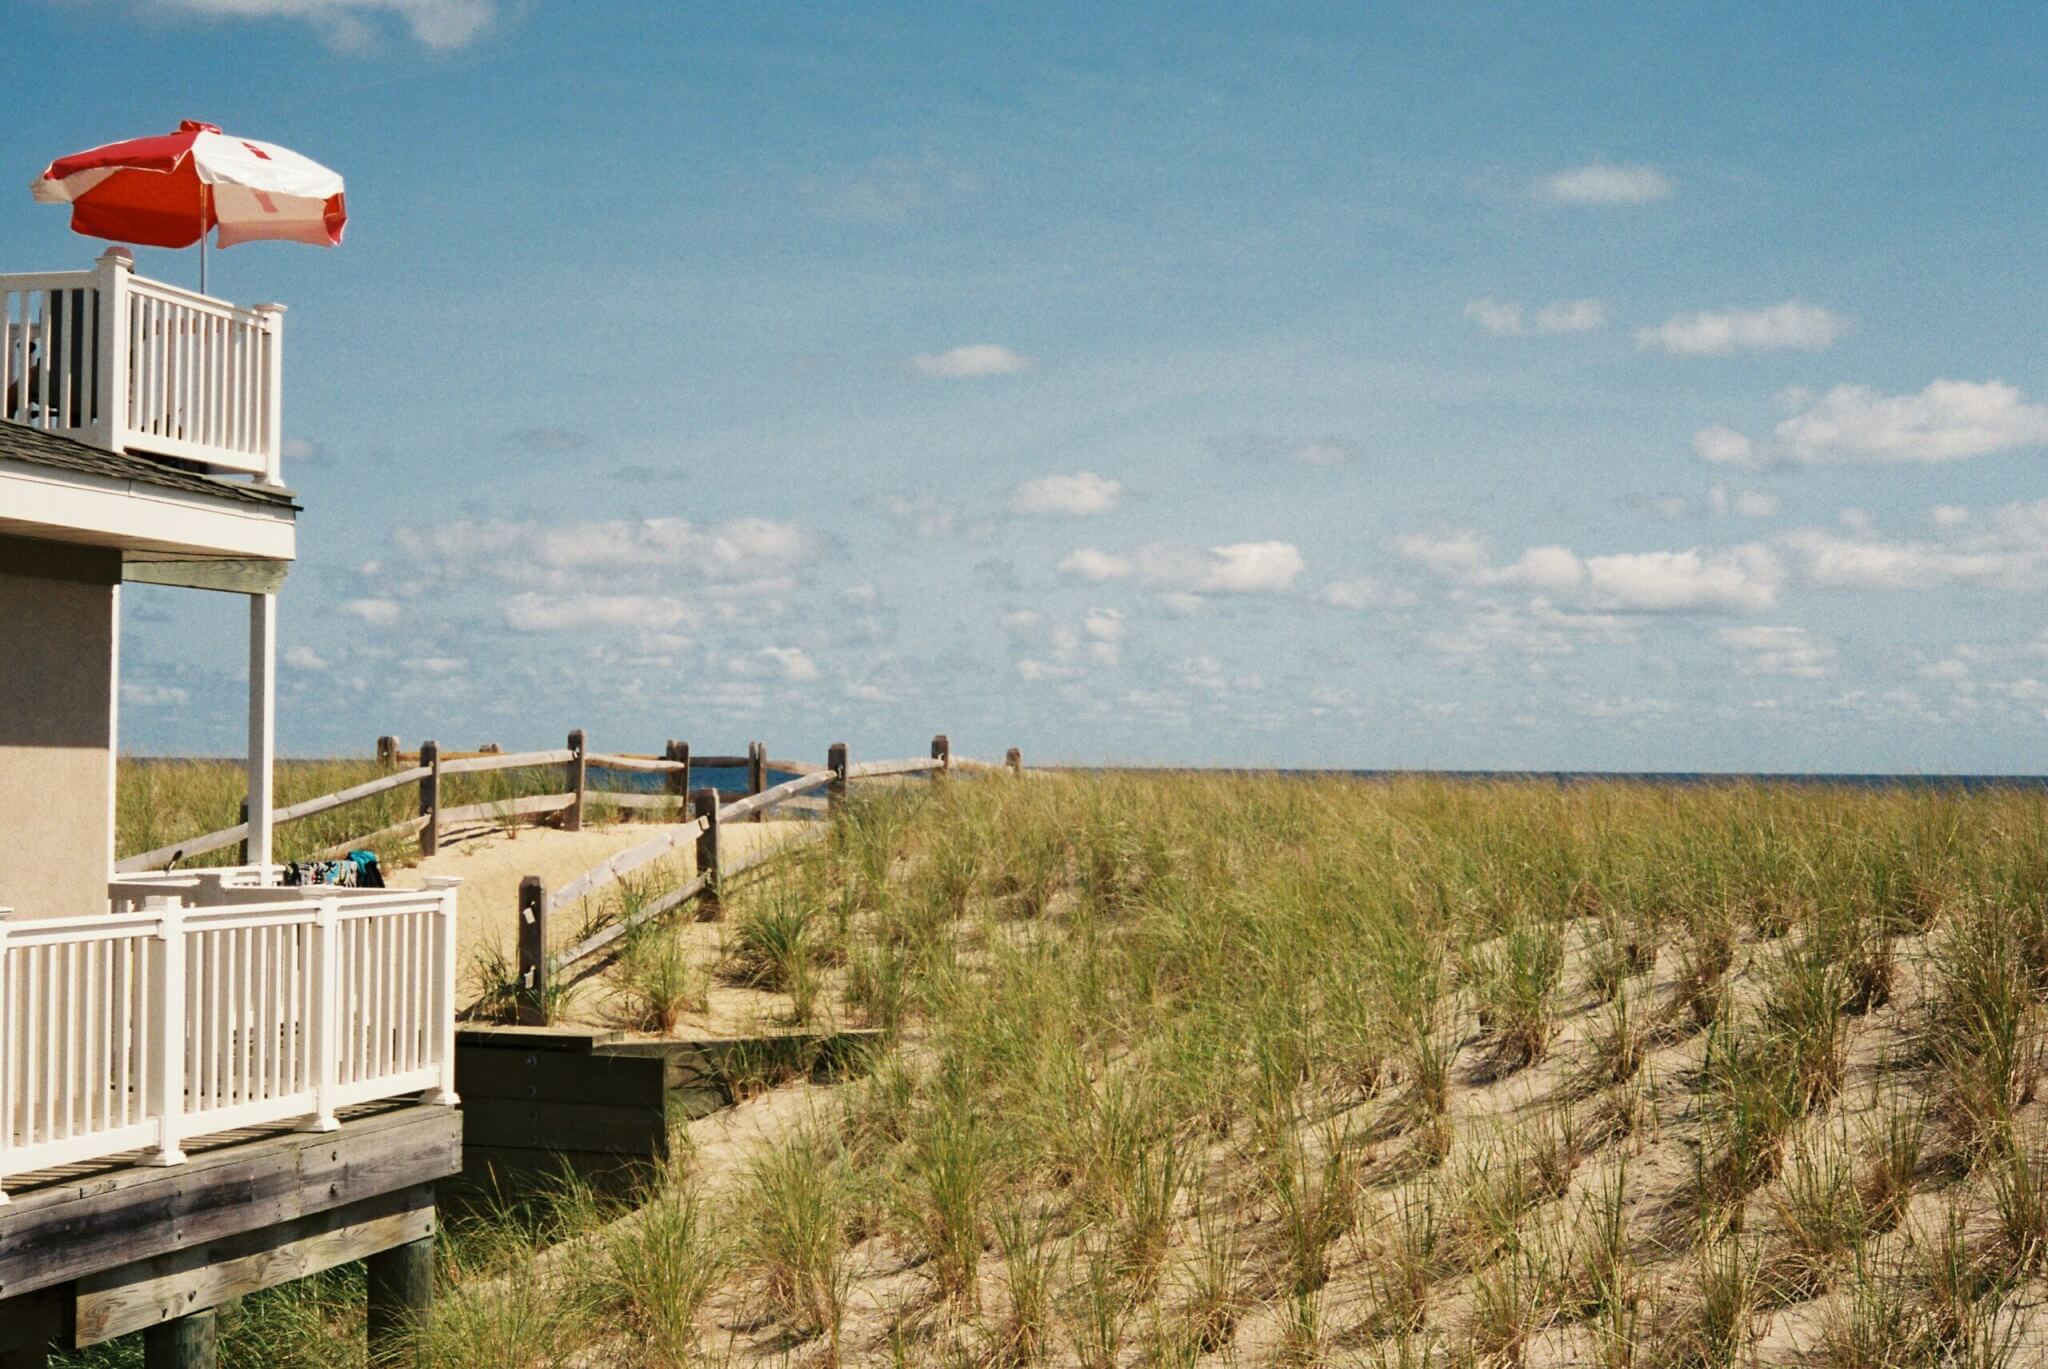 New Jersey beach. Shot with Canon AE-1 Program.